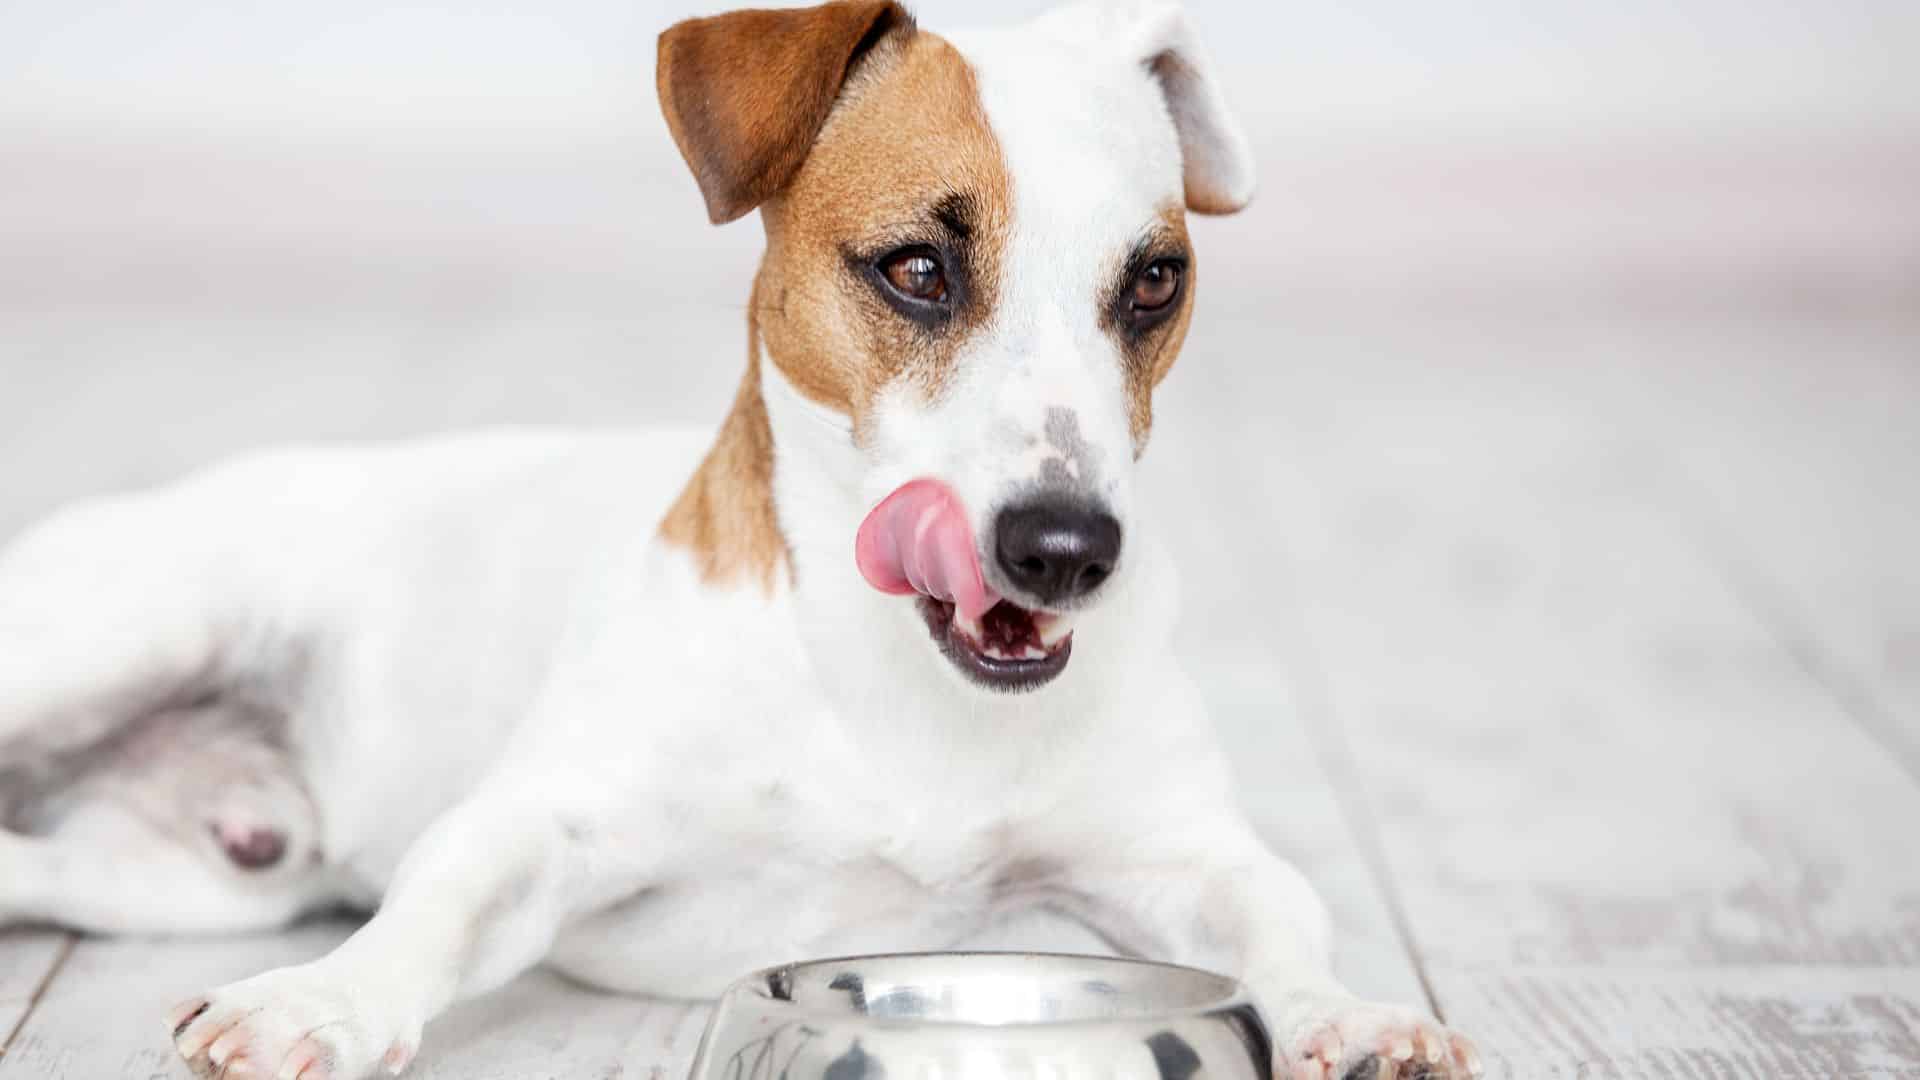 Prevent food allergies and certain health issues with your dog's diet